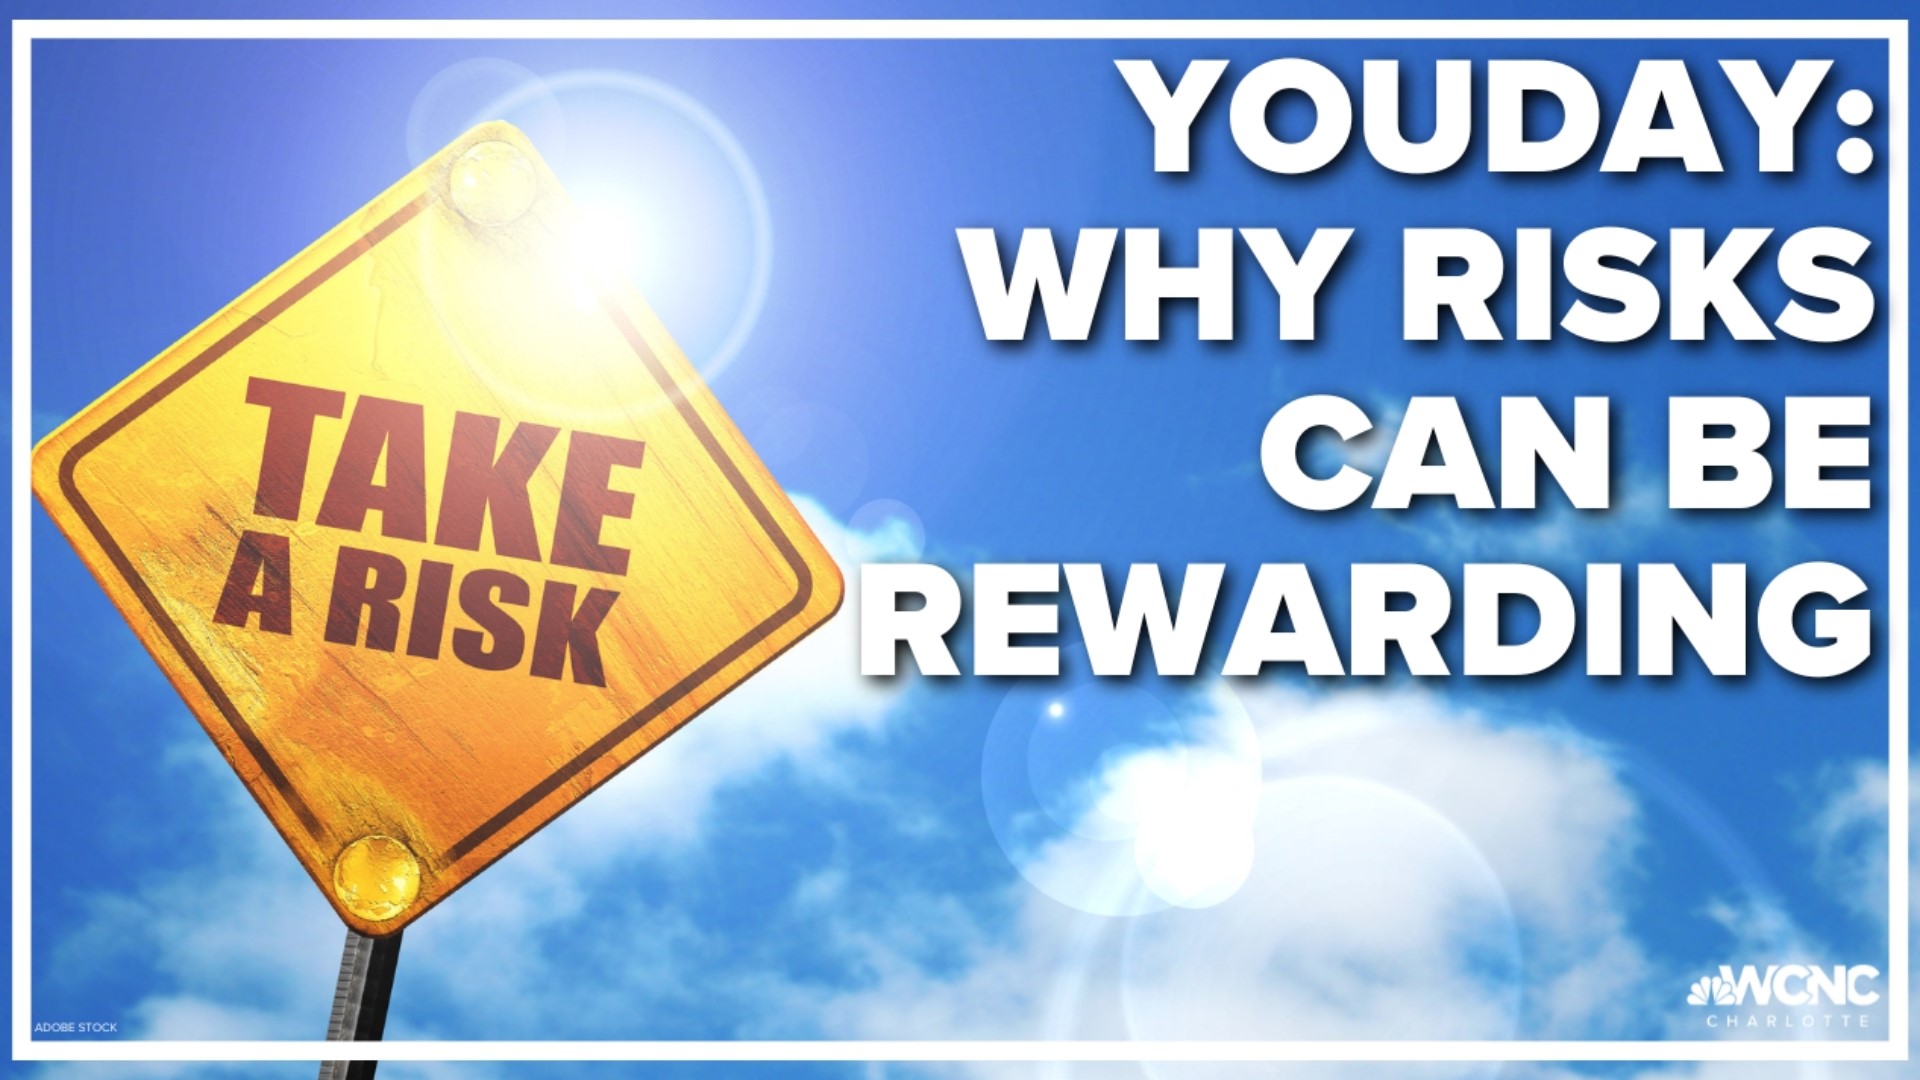 Coach LaMonte explains why risks can be rewarding in more ways than one.